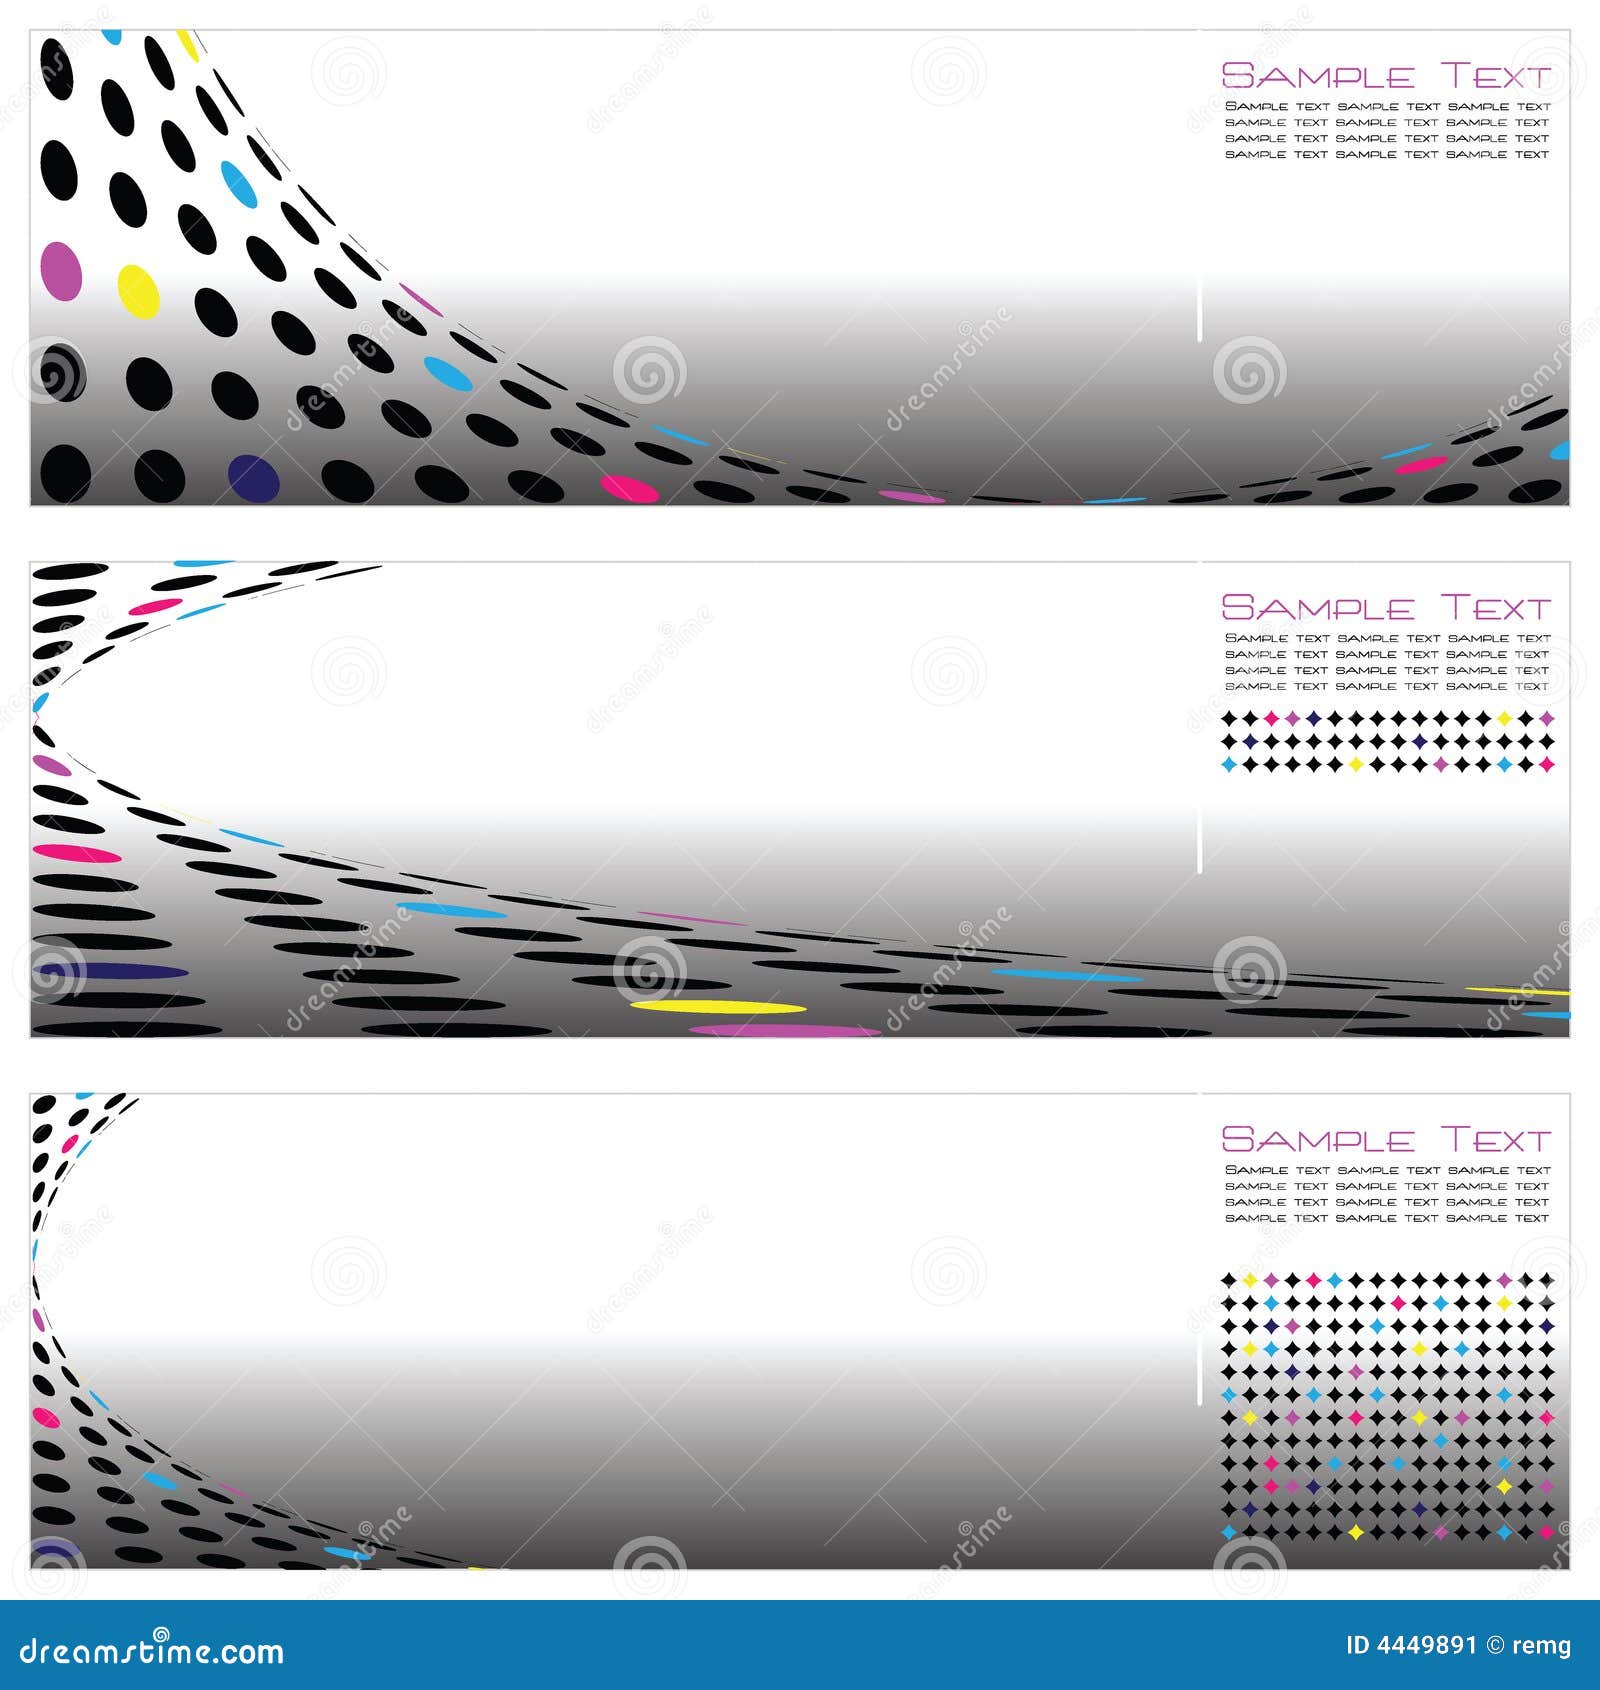 set-of-three-high-quality-template-abstract-backgr-stock-illustration